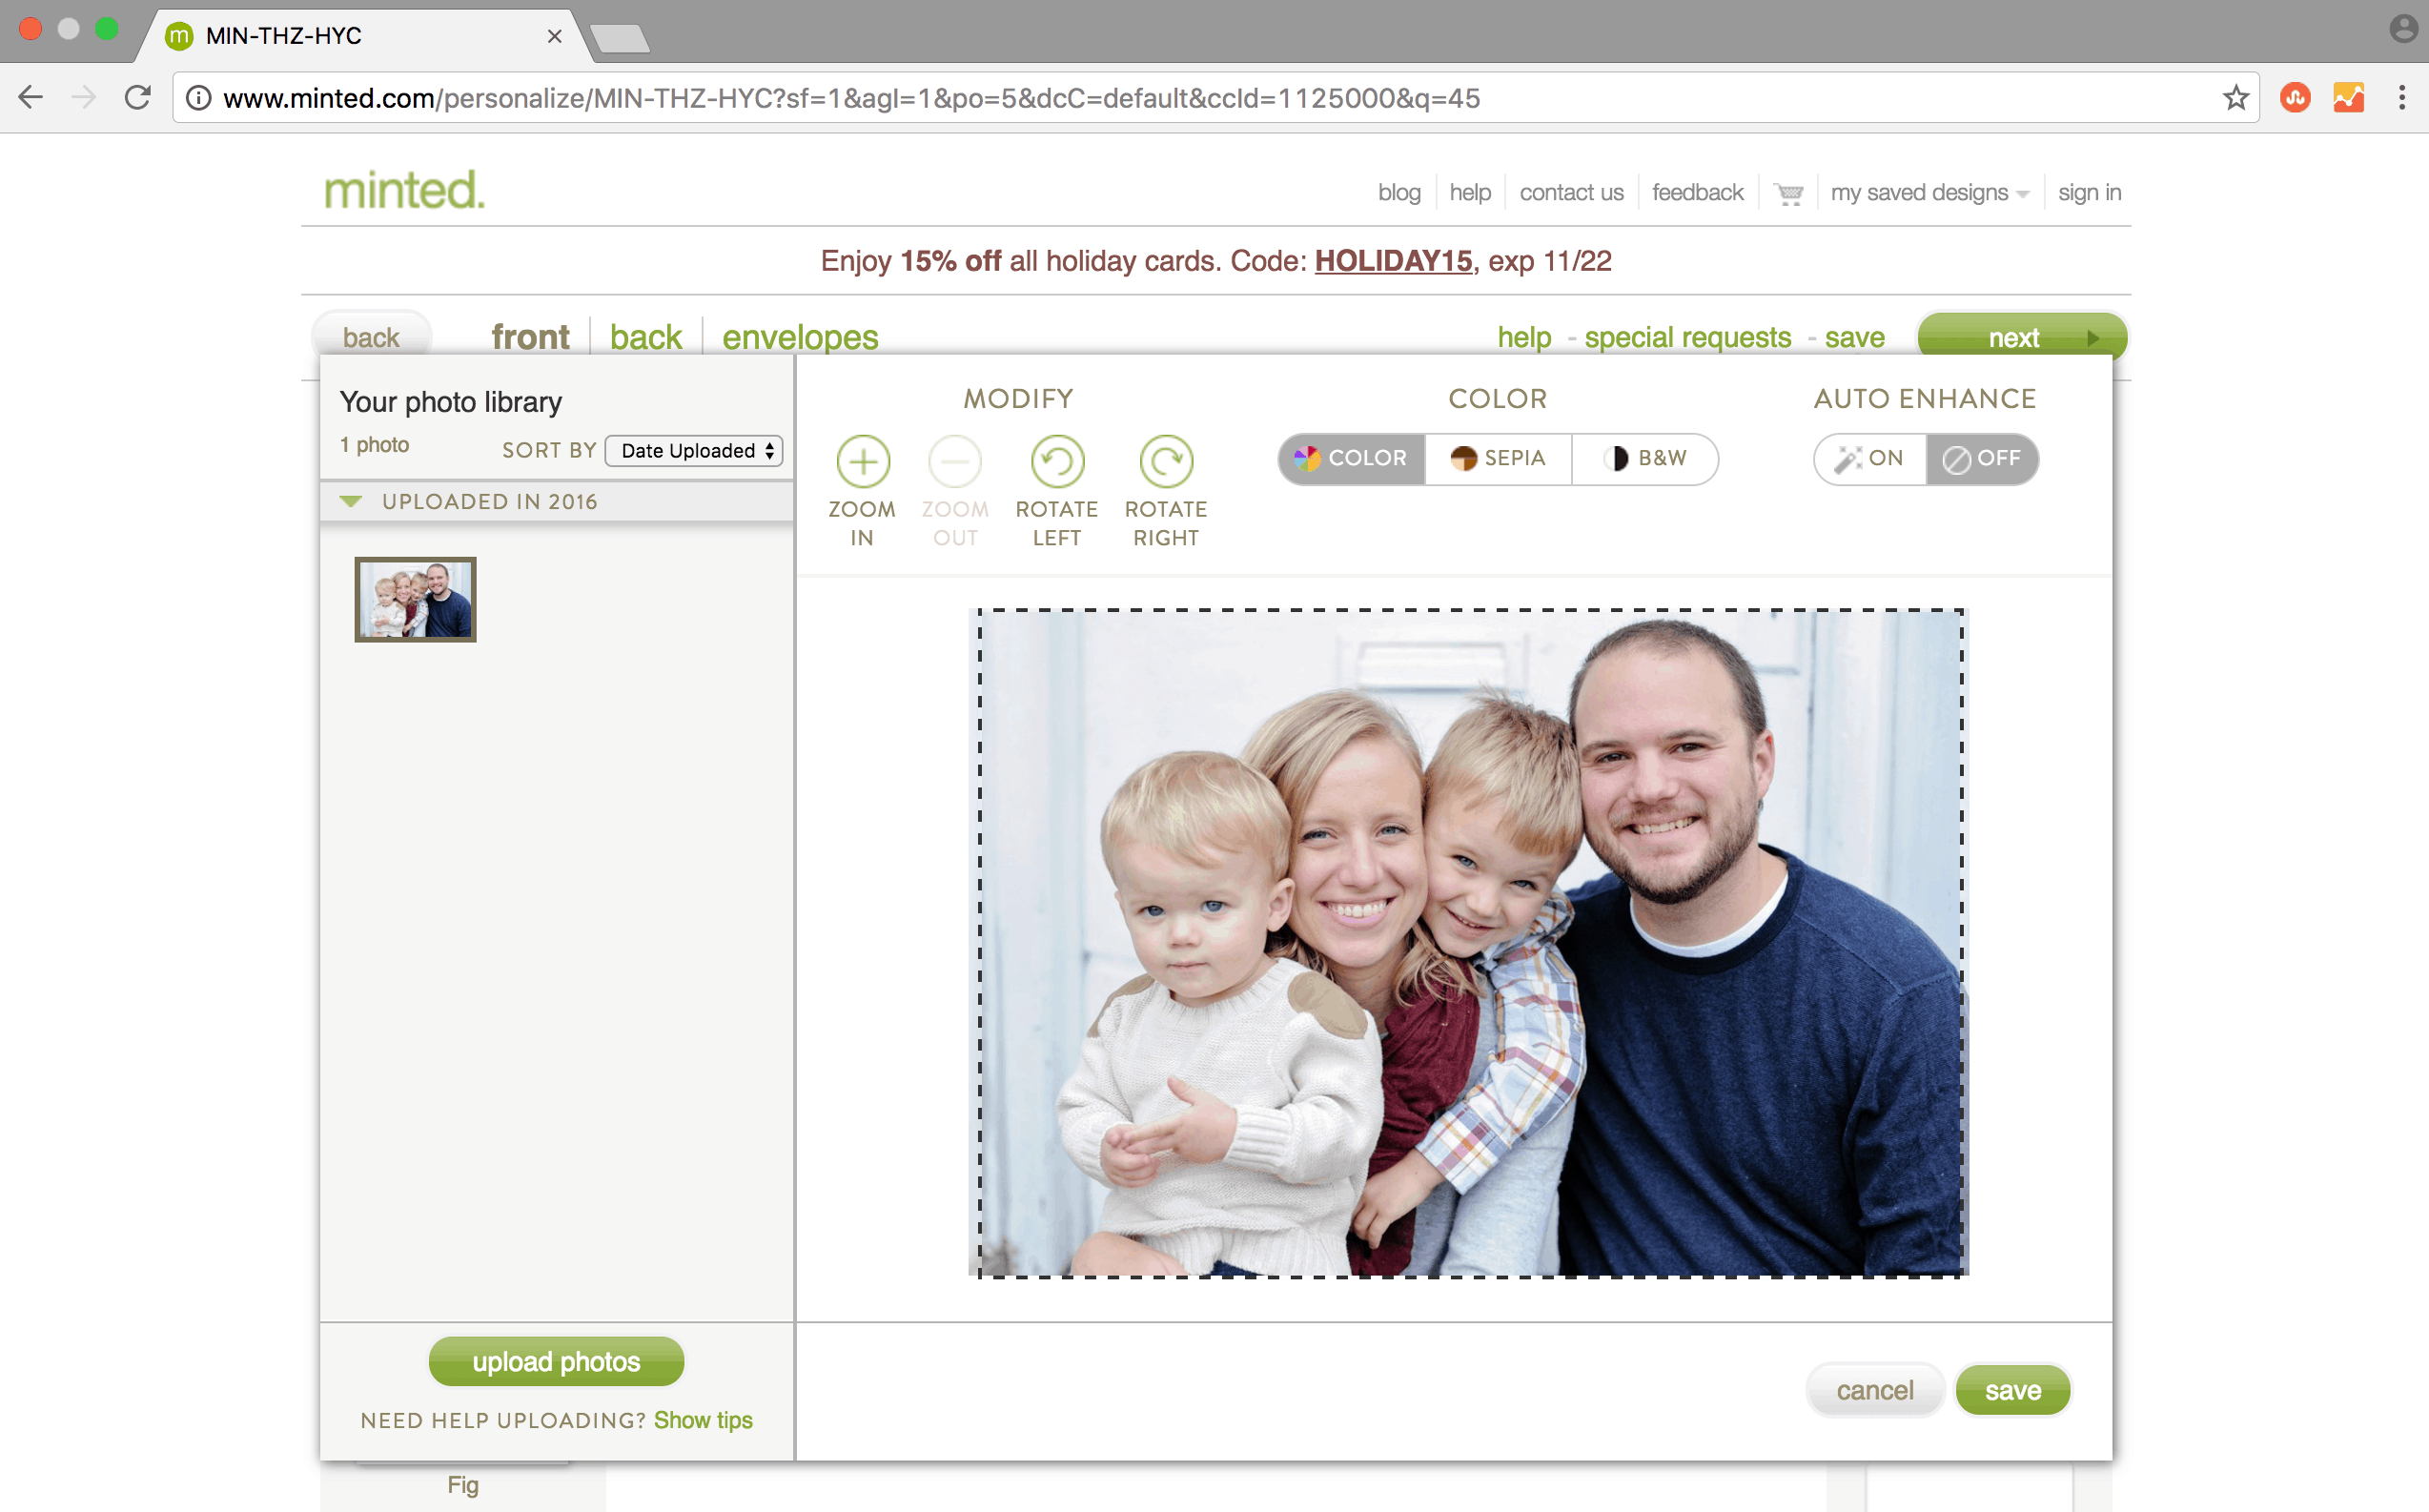 Uploading a family photo is the first step in creating your own Christmas cards on minted.com